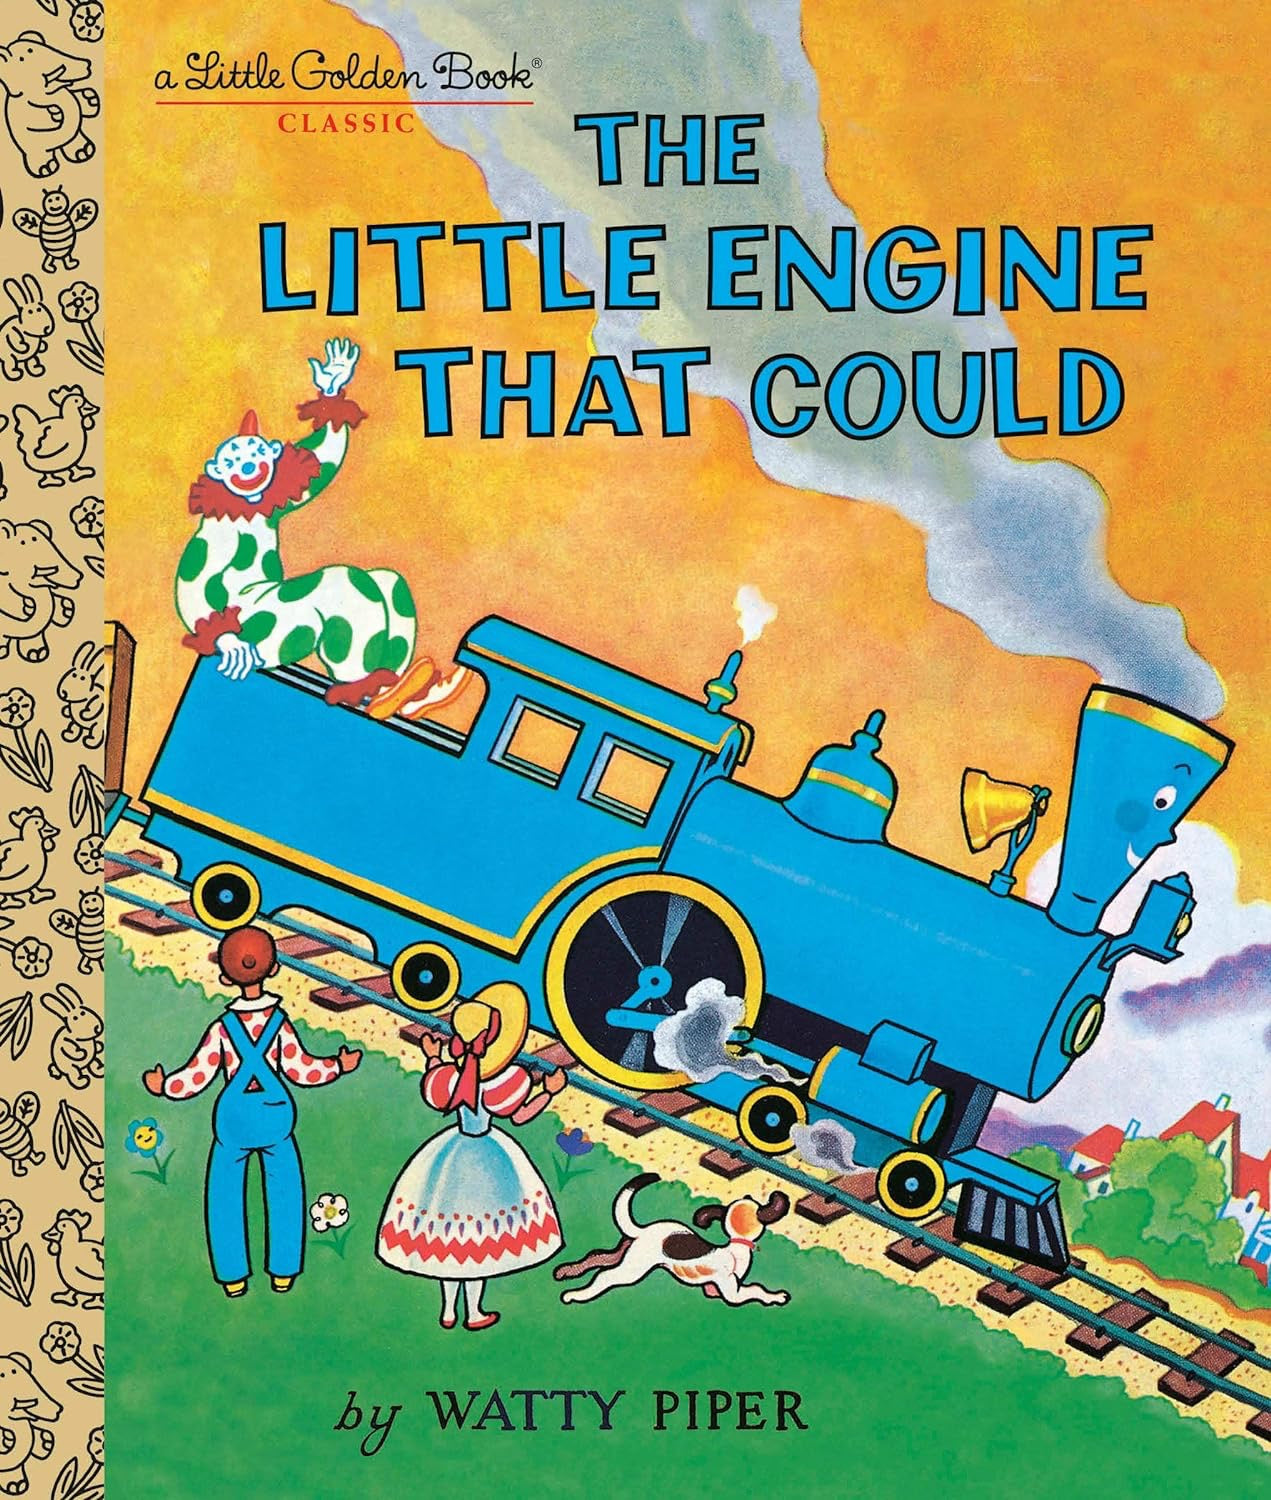 "The Little Engine That Could" Little Golden Book